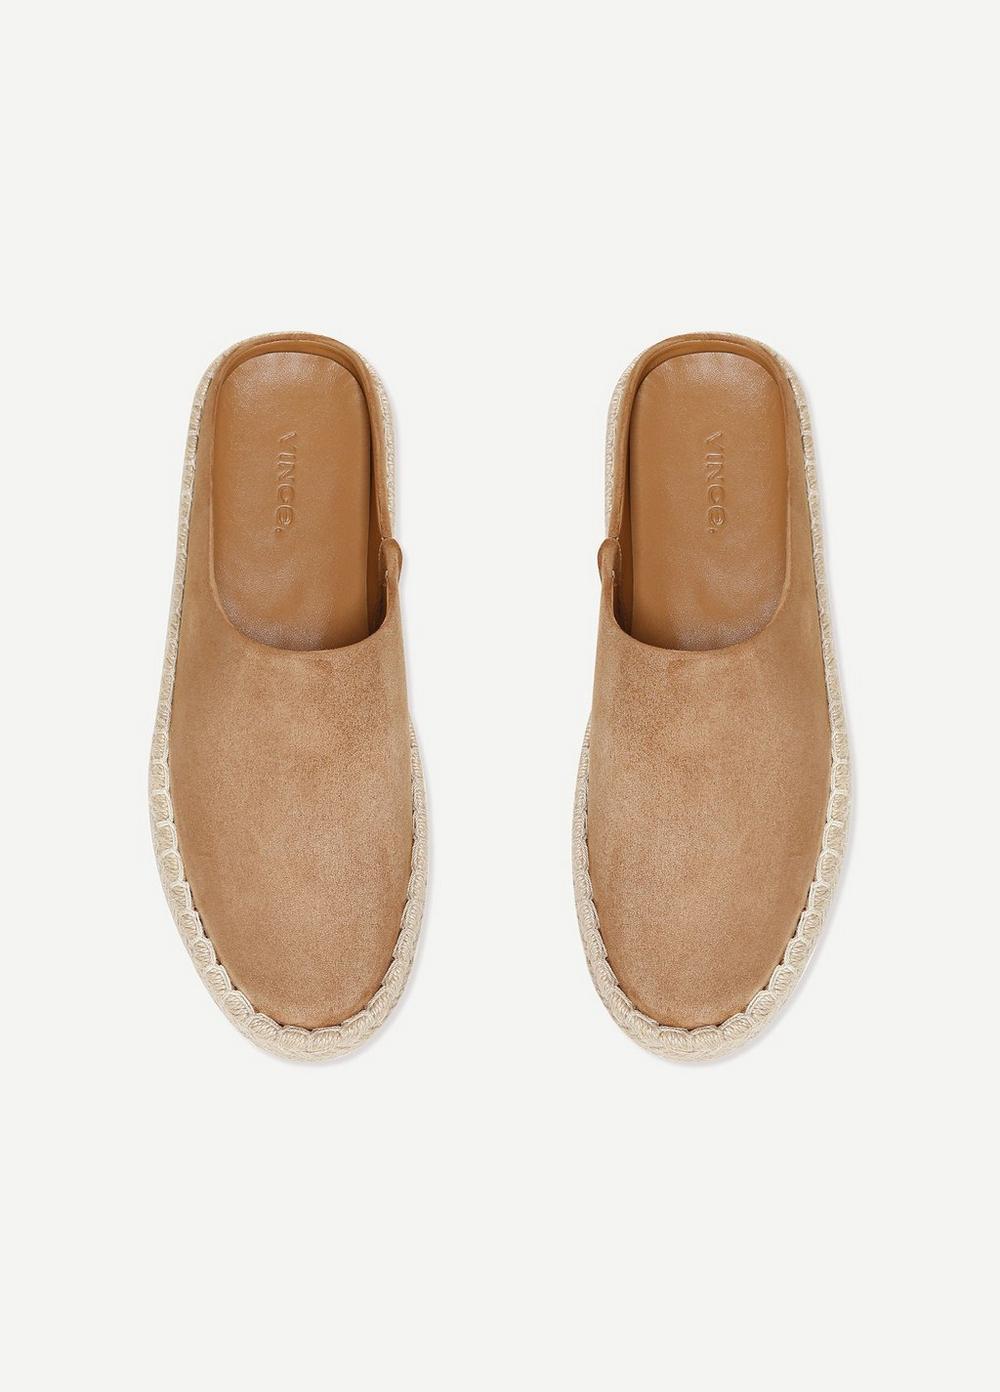 Vince Ulla Suede Flat in Natural | Lyst